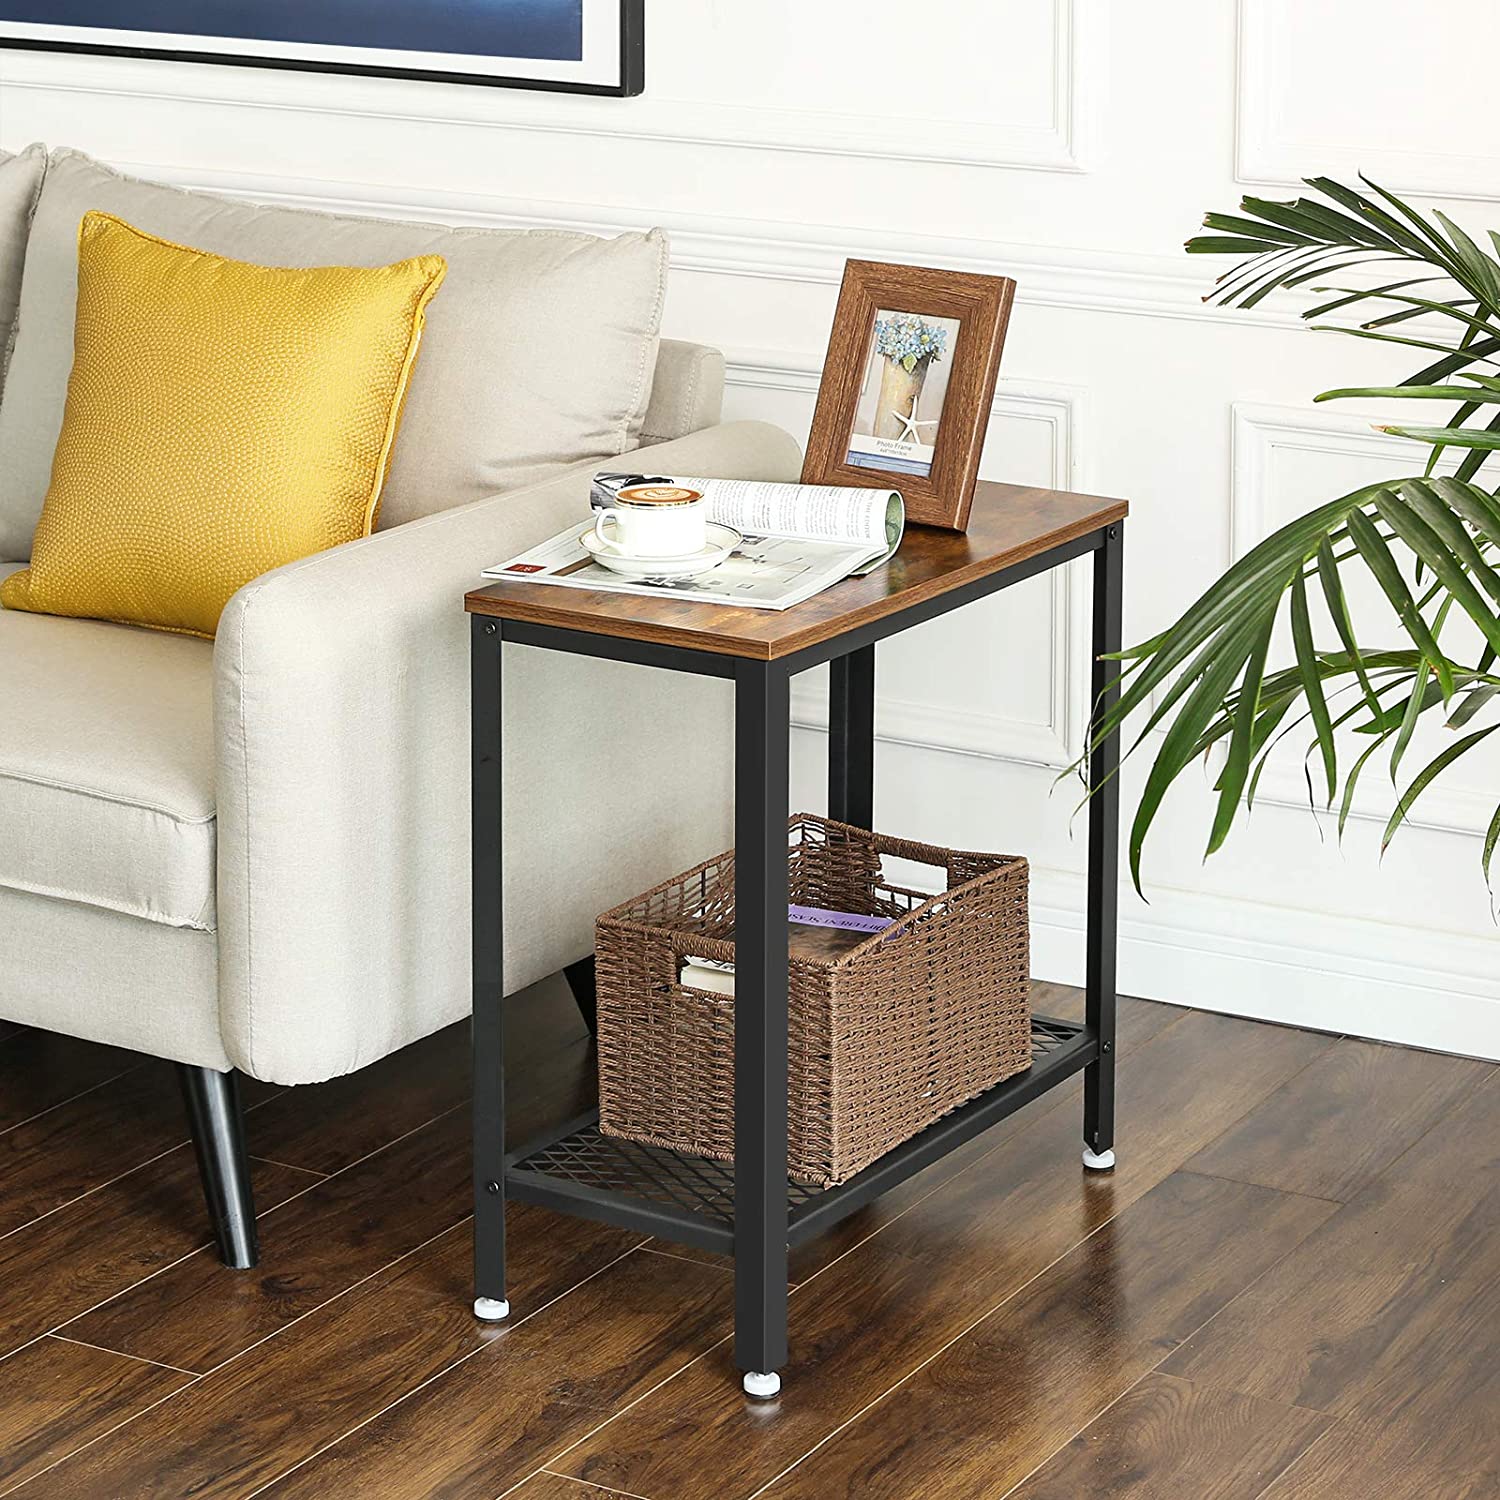 2-Tier Industrial Side Table With Mesh And Metal Frame Rustic Brown